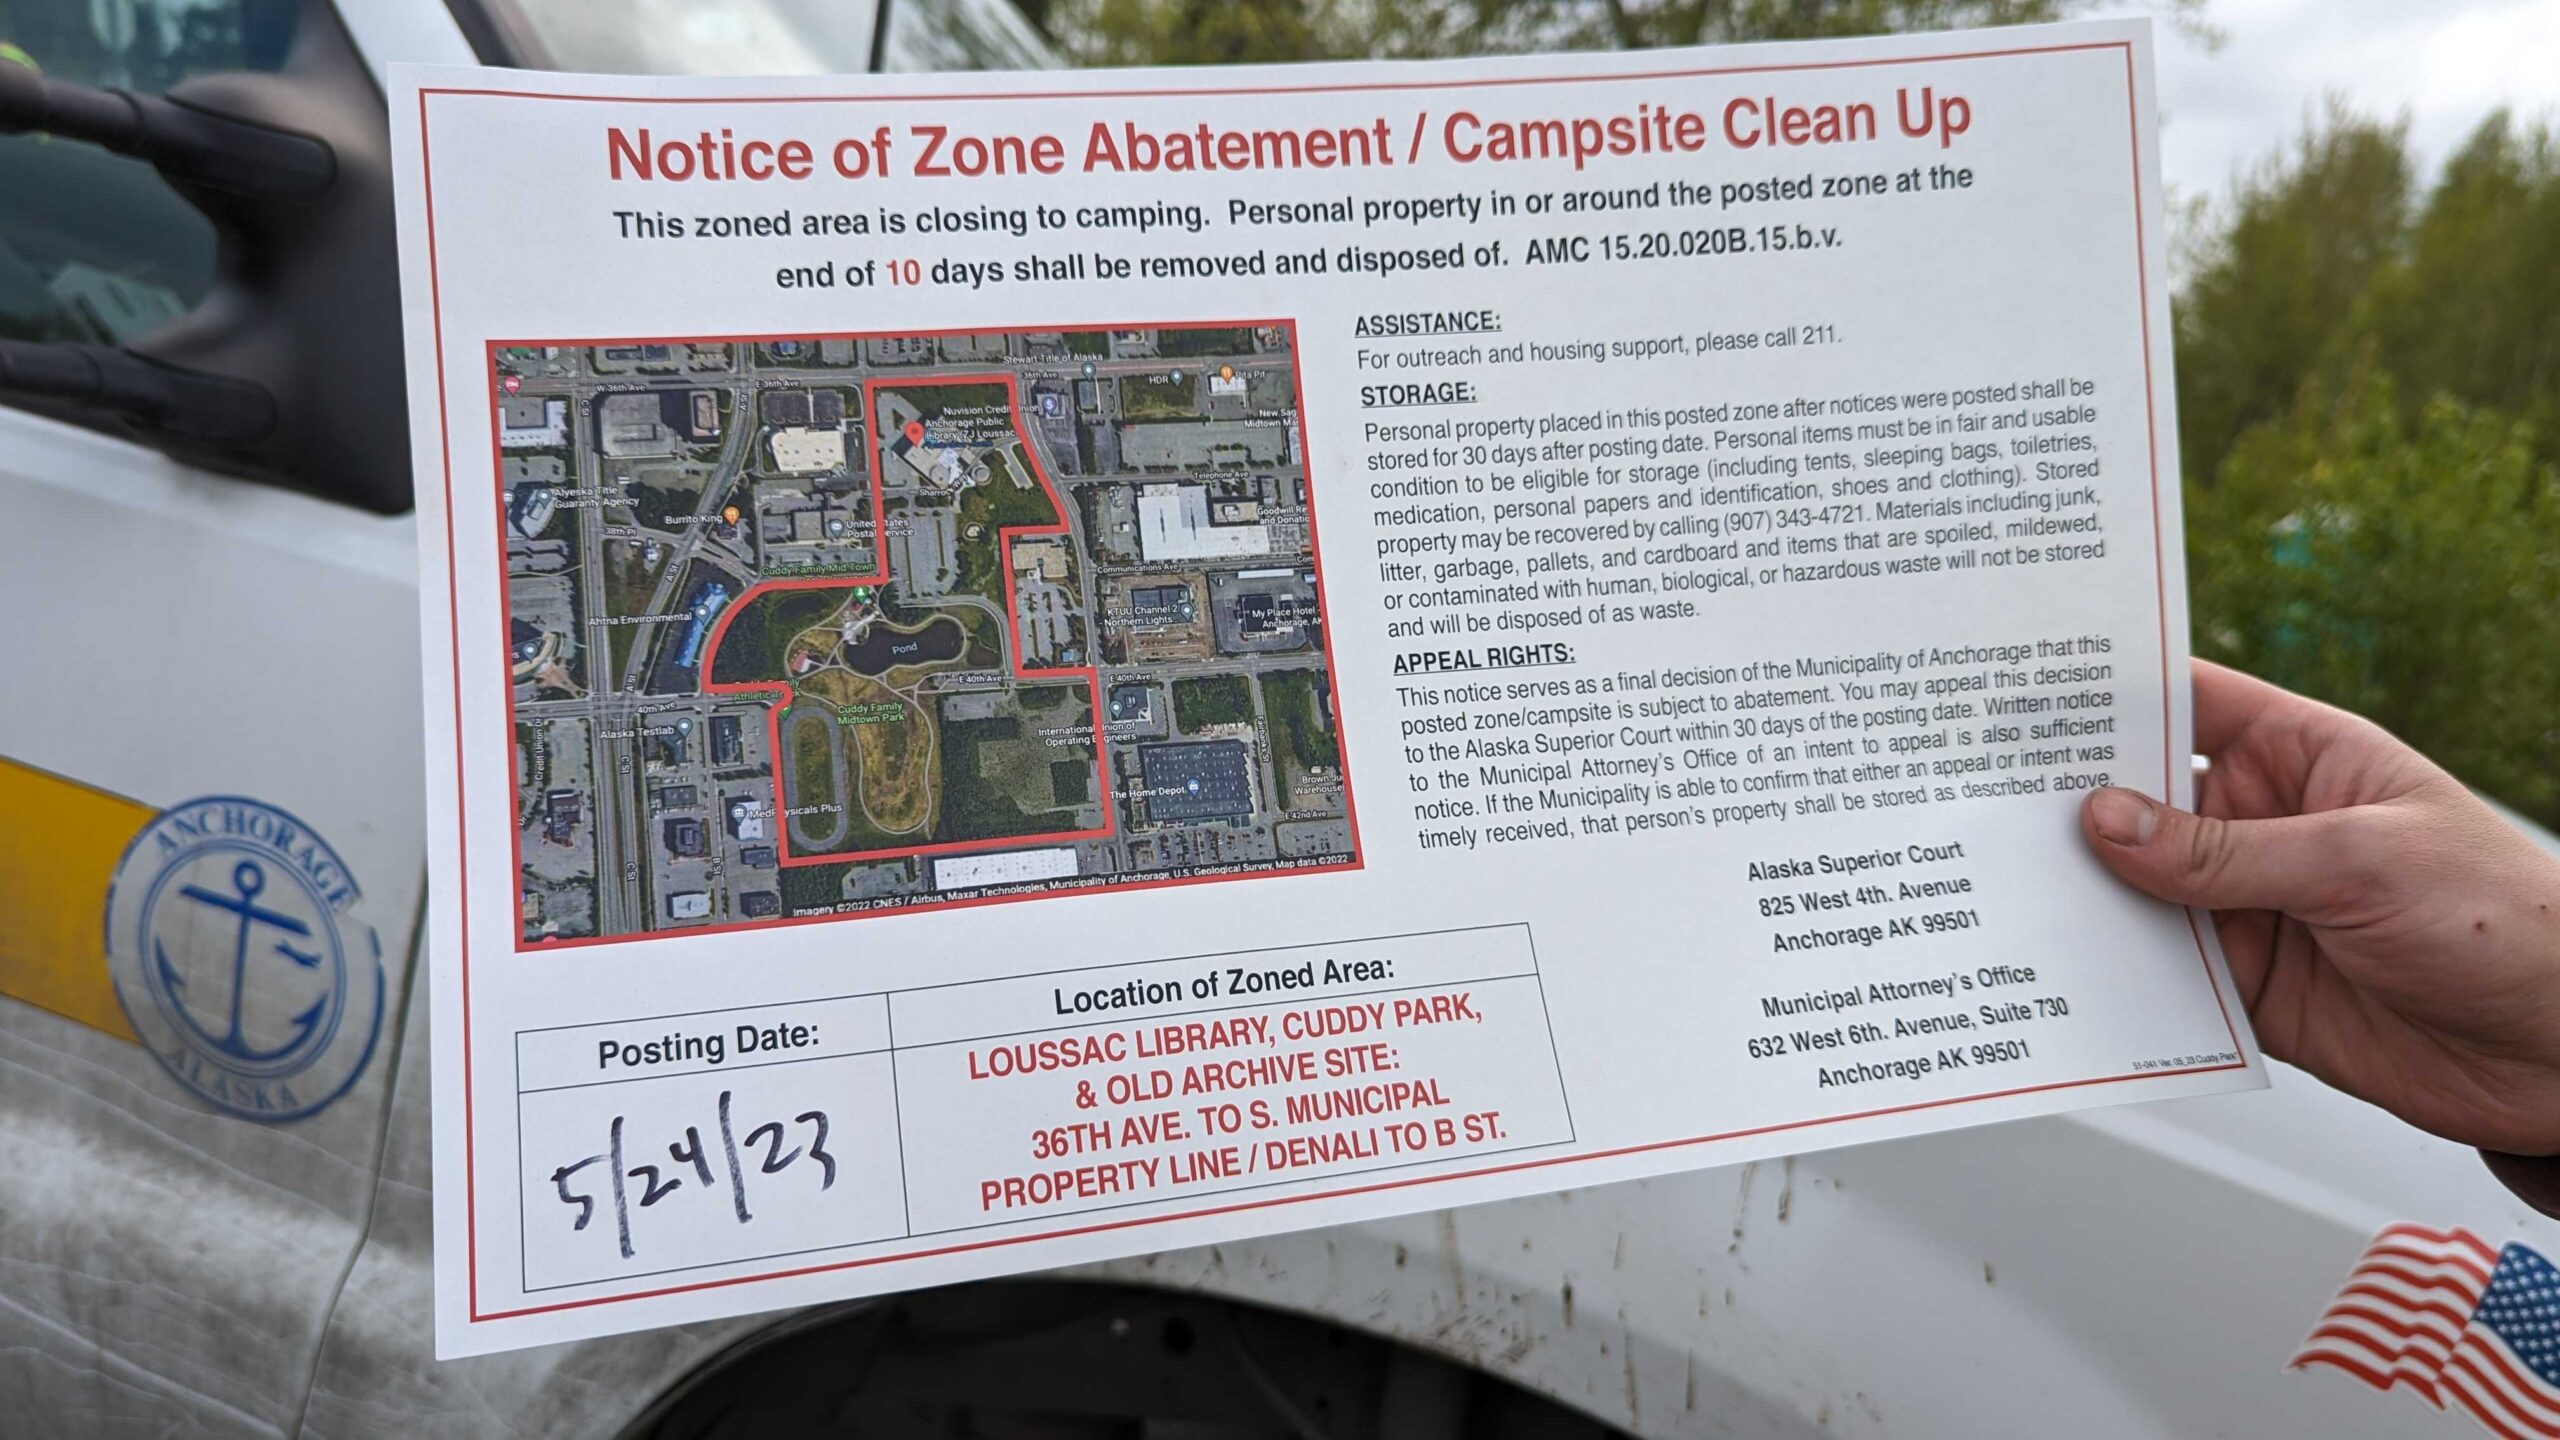 a flyer says "notice of zone abatement/campsite clean up"